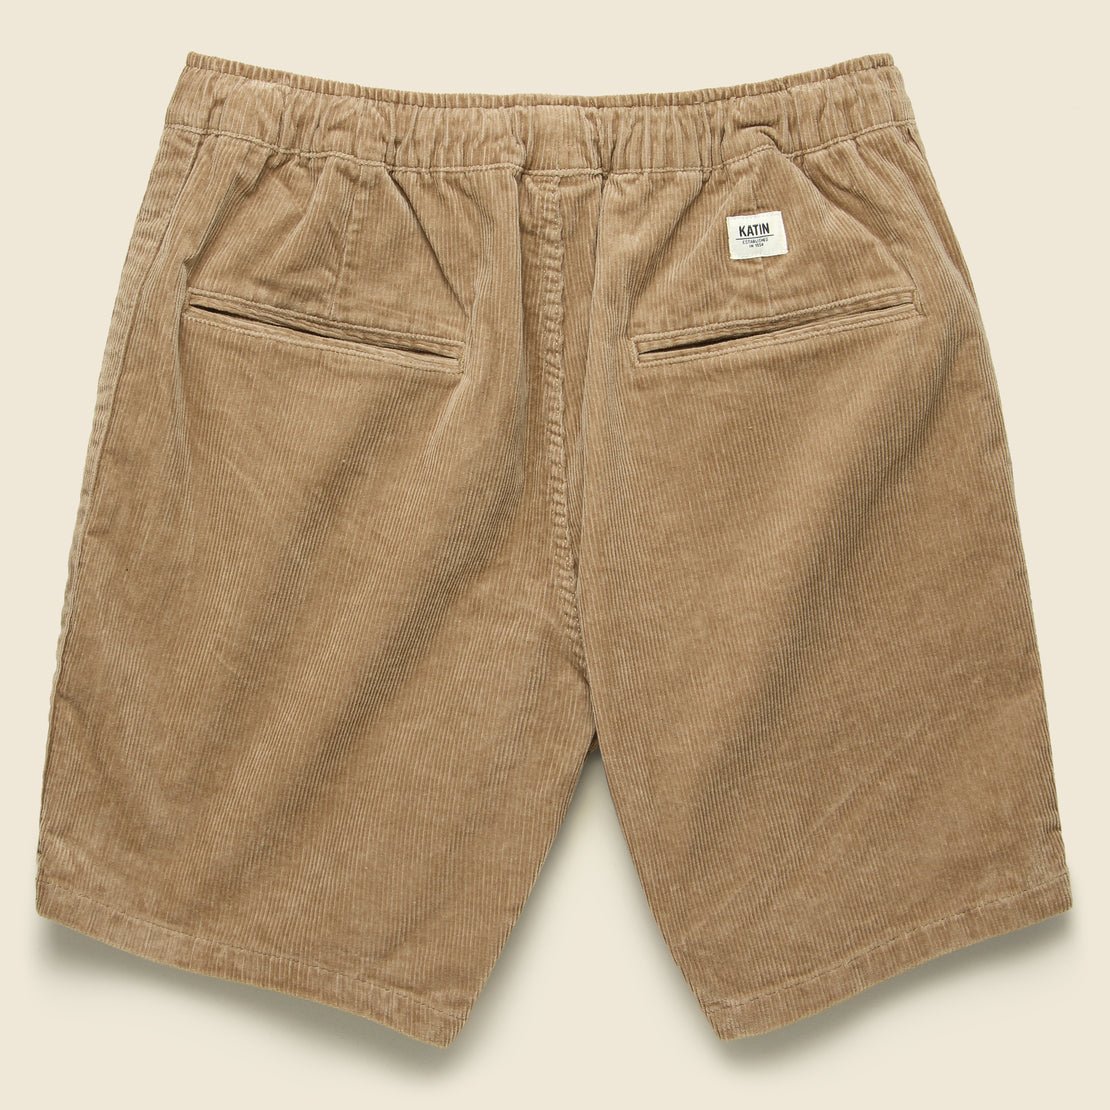 Kord Short - Dusty Pink - Katin - STAG Provisions - Shorts - Solid